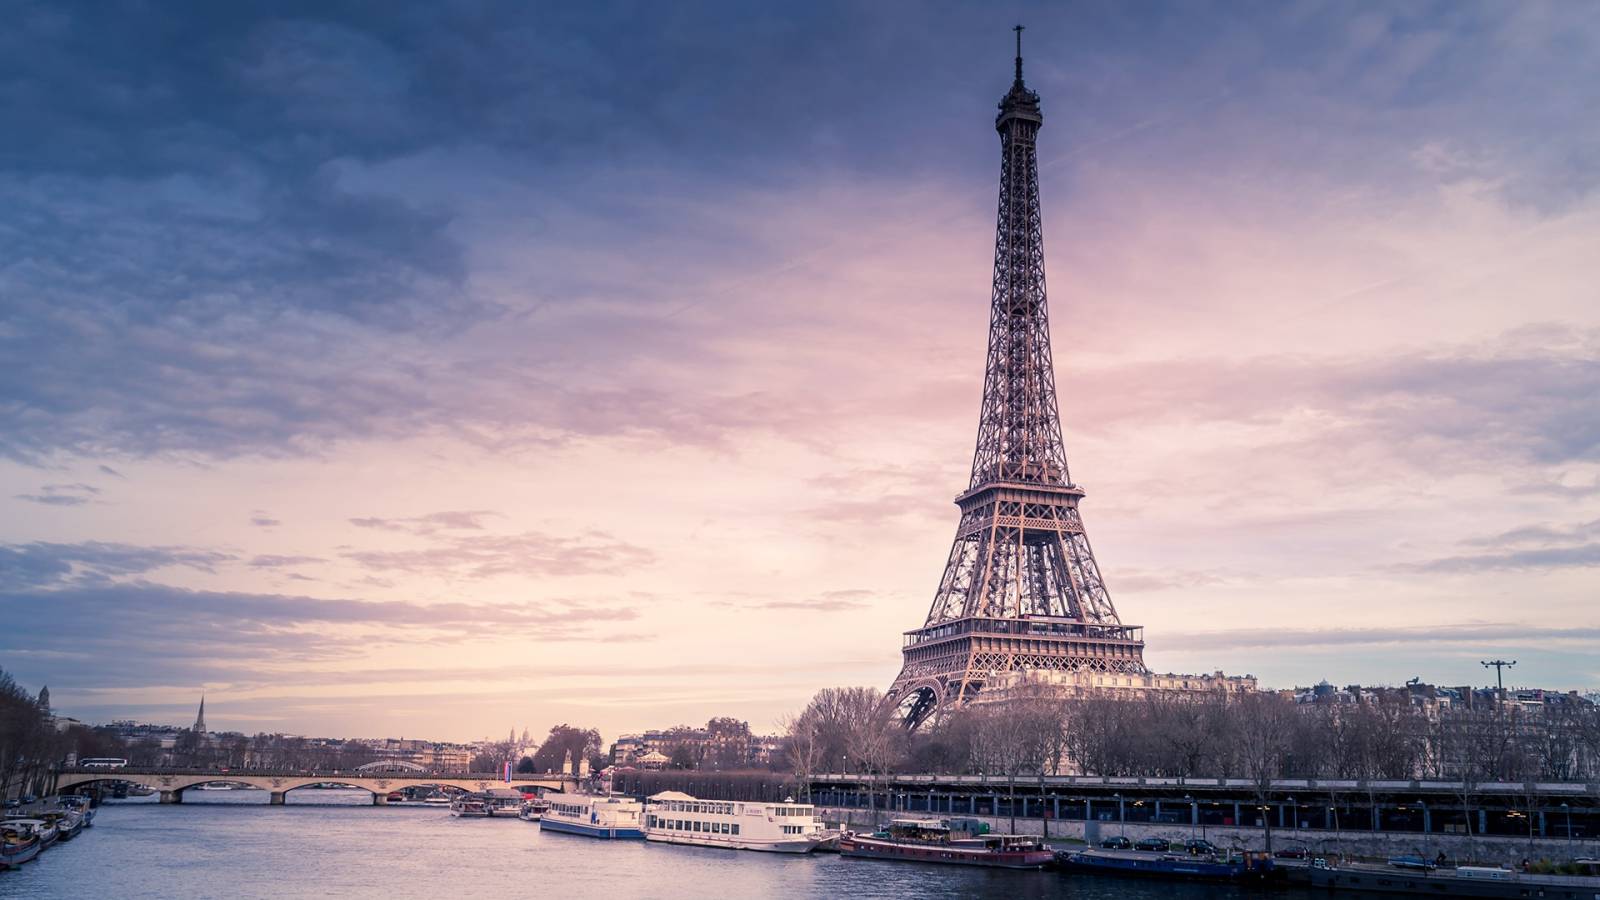 Luxury France Tour 5-Day Exploration of Paris, Versailles, Giverny, Loire Châteaux, and Normandy Beaches with Minibus Sprinter